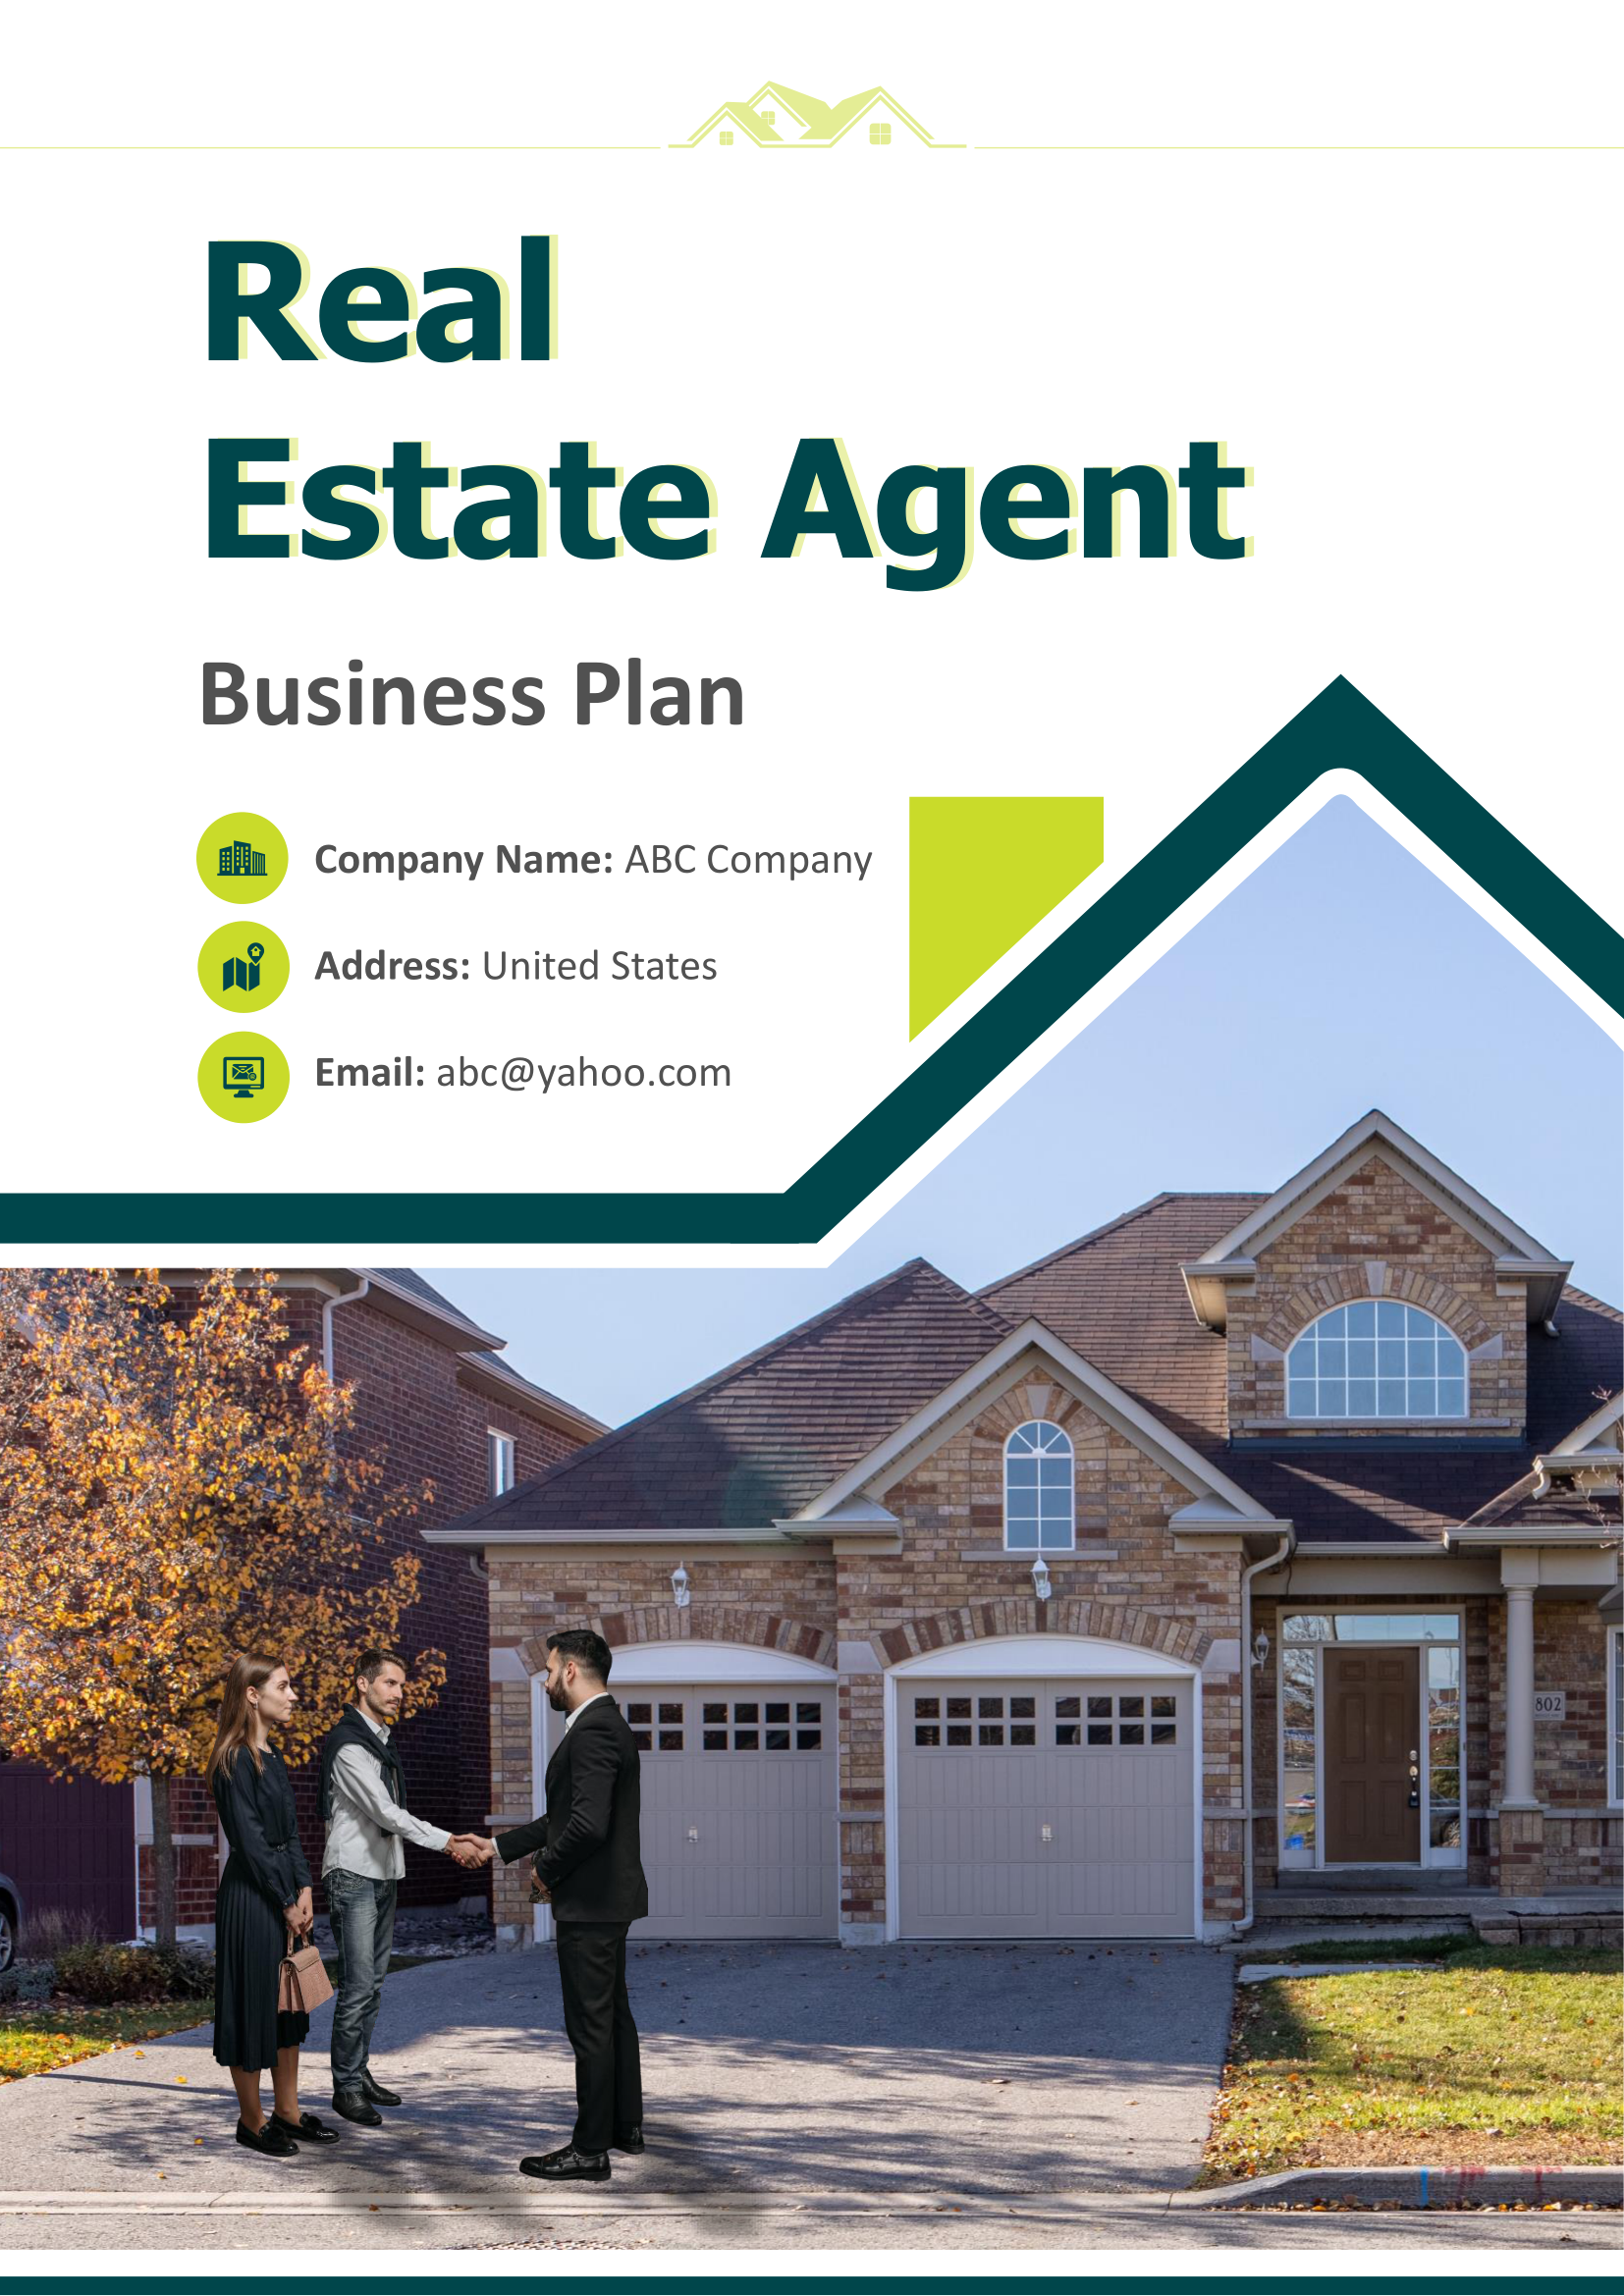 Real Estate Agent Business Plan-